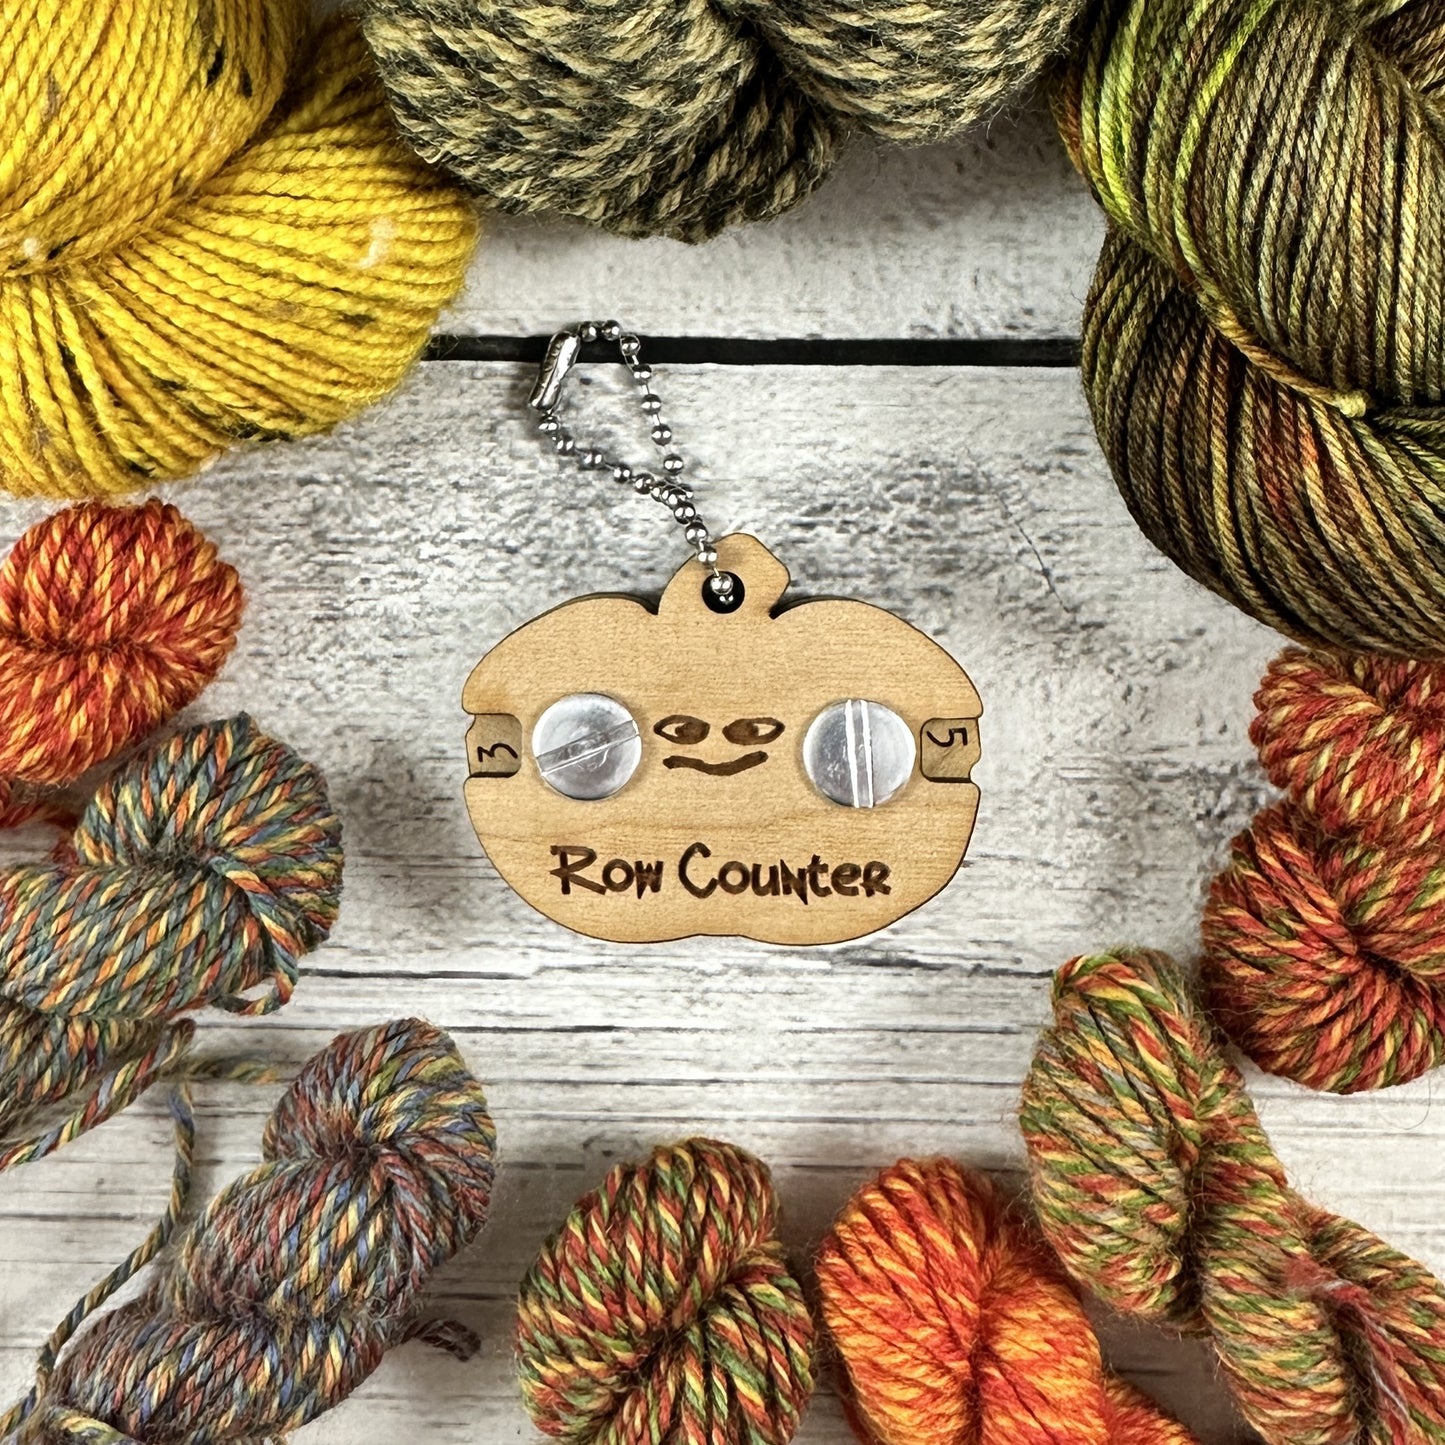 15 or 20 Row Counter or 10-20 Stainless Steel Knitters Helper Pattern  Reminder for Knitting Stitch Counter Marker Gift Knitter Notion 